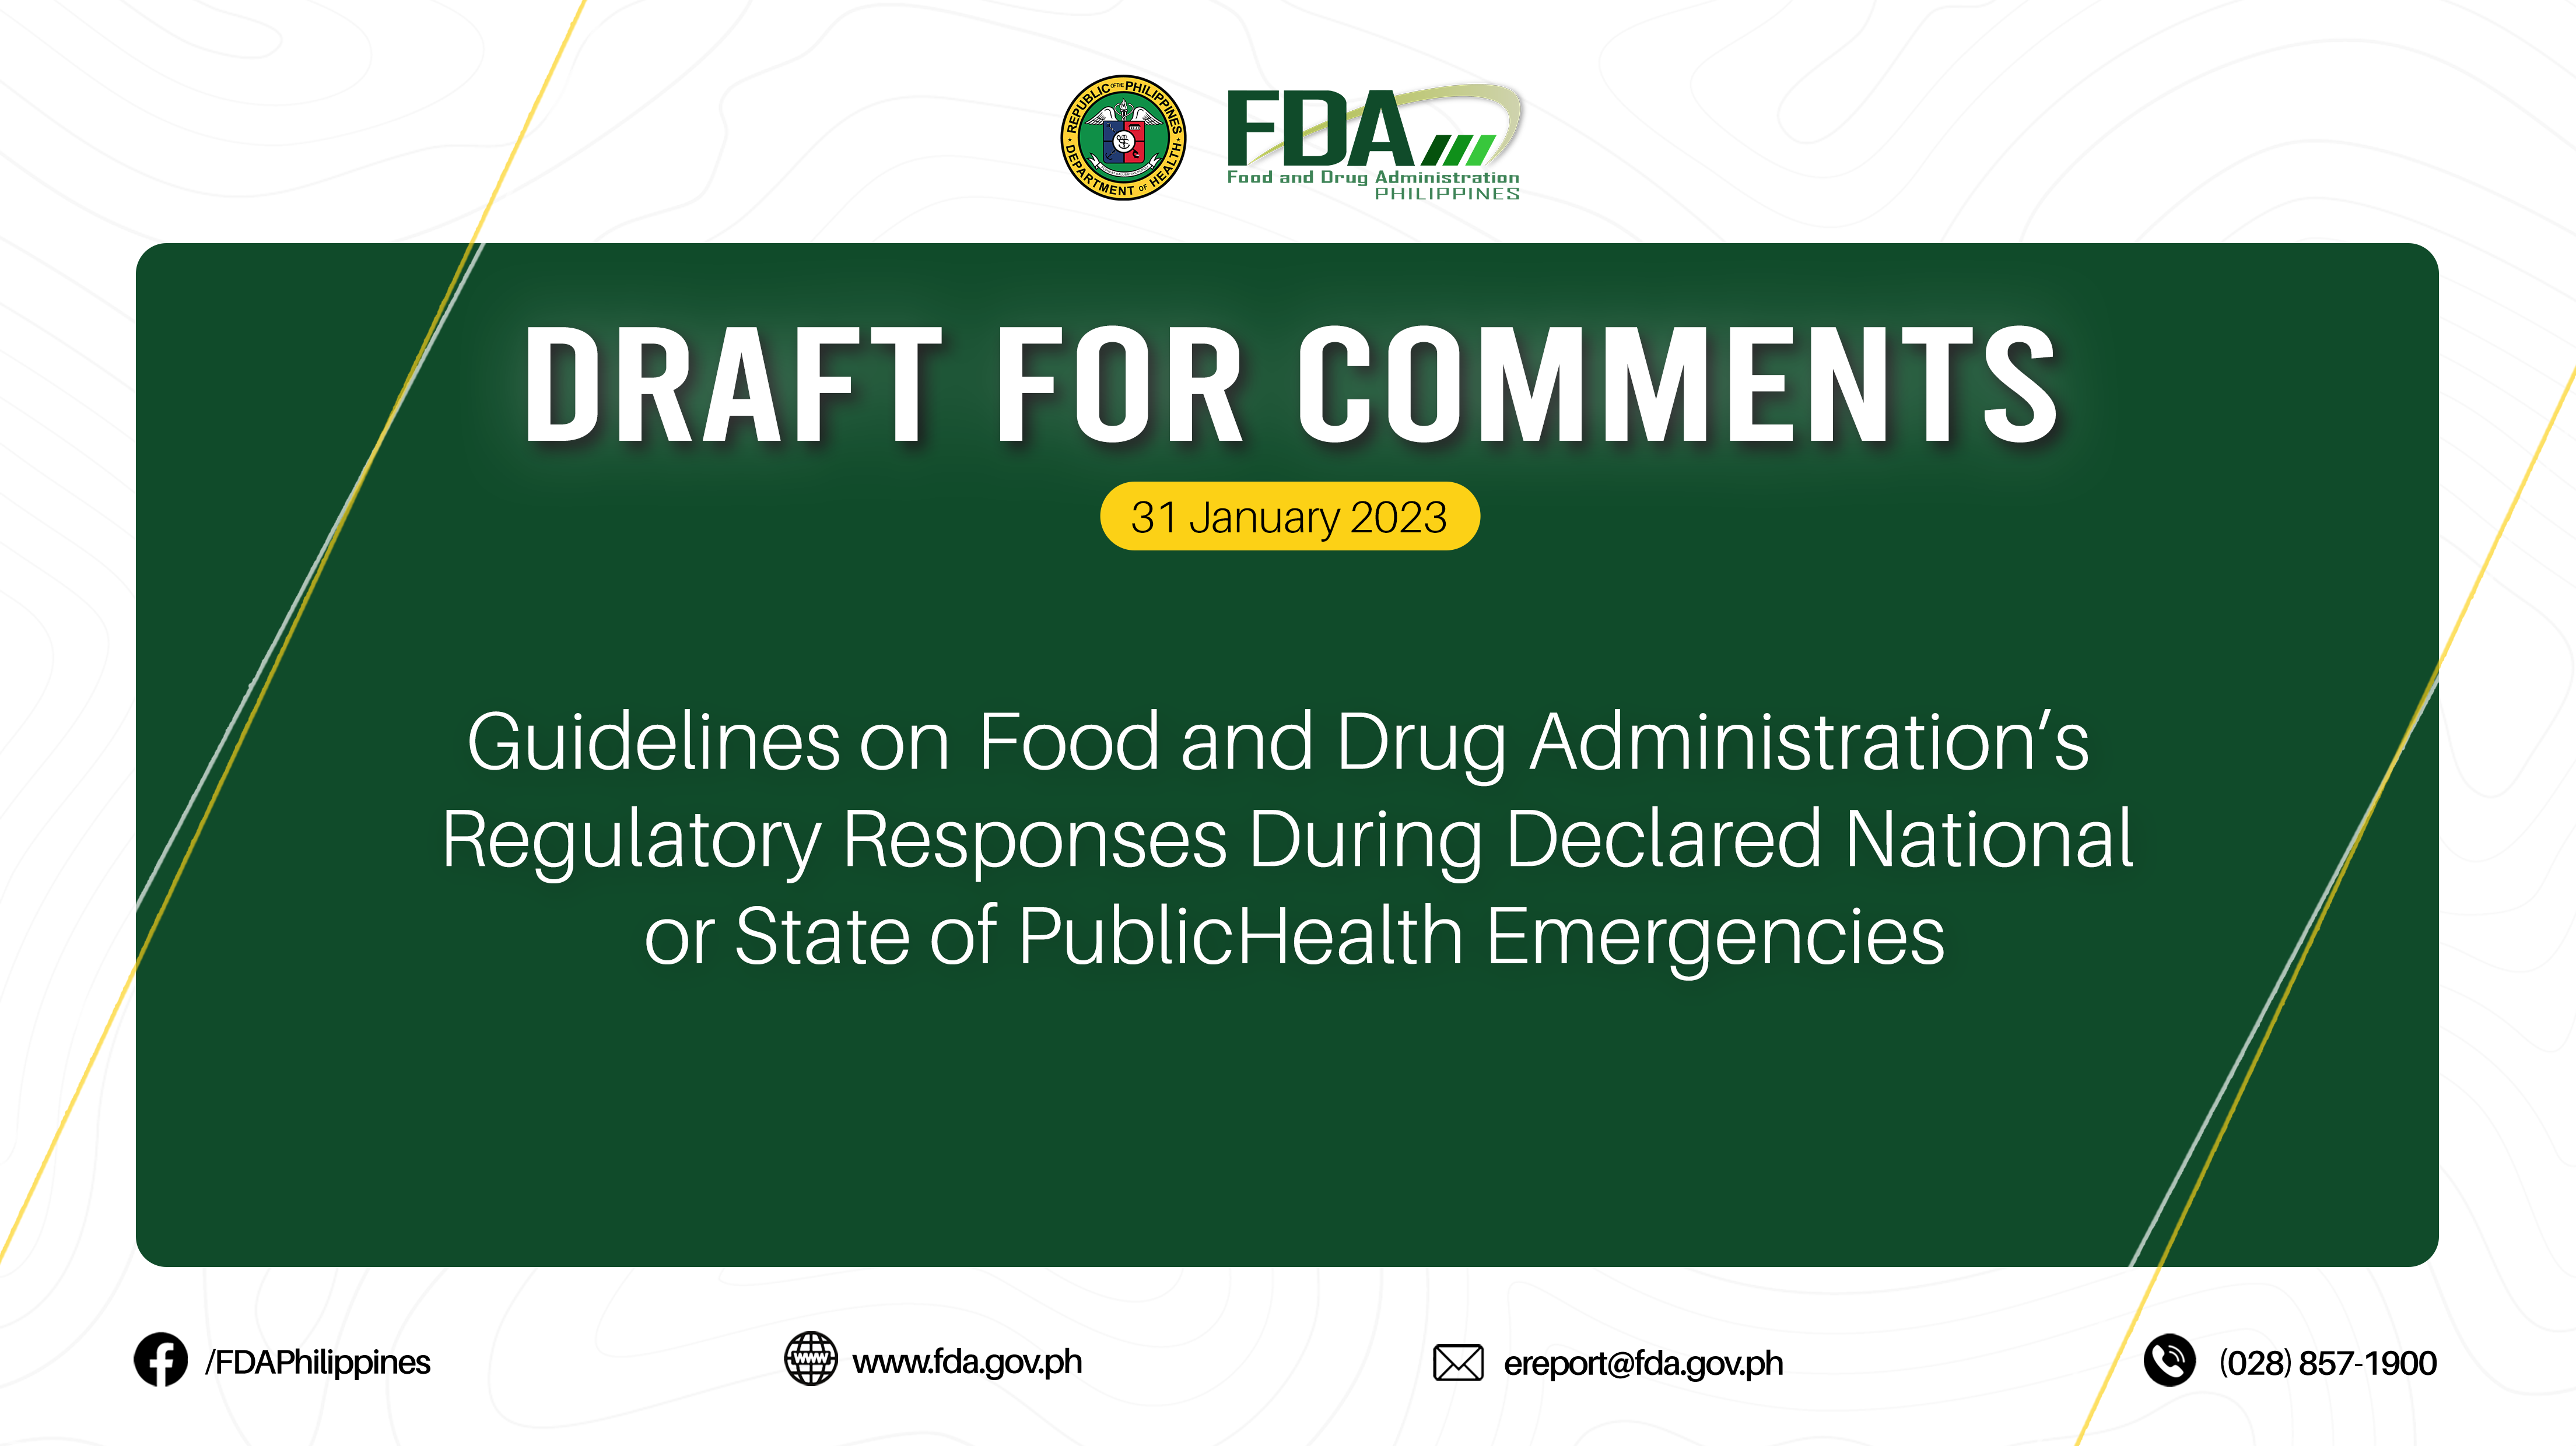 Draft for Comments || Guidelines on Food and Drug Administration’s Regulatory Responses During Declared National or State of Public Health Emergencies